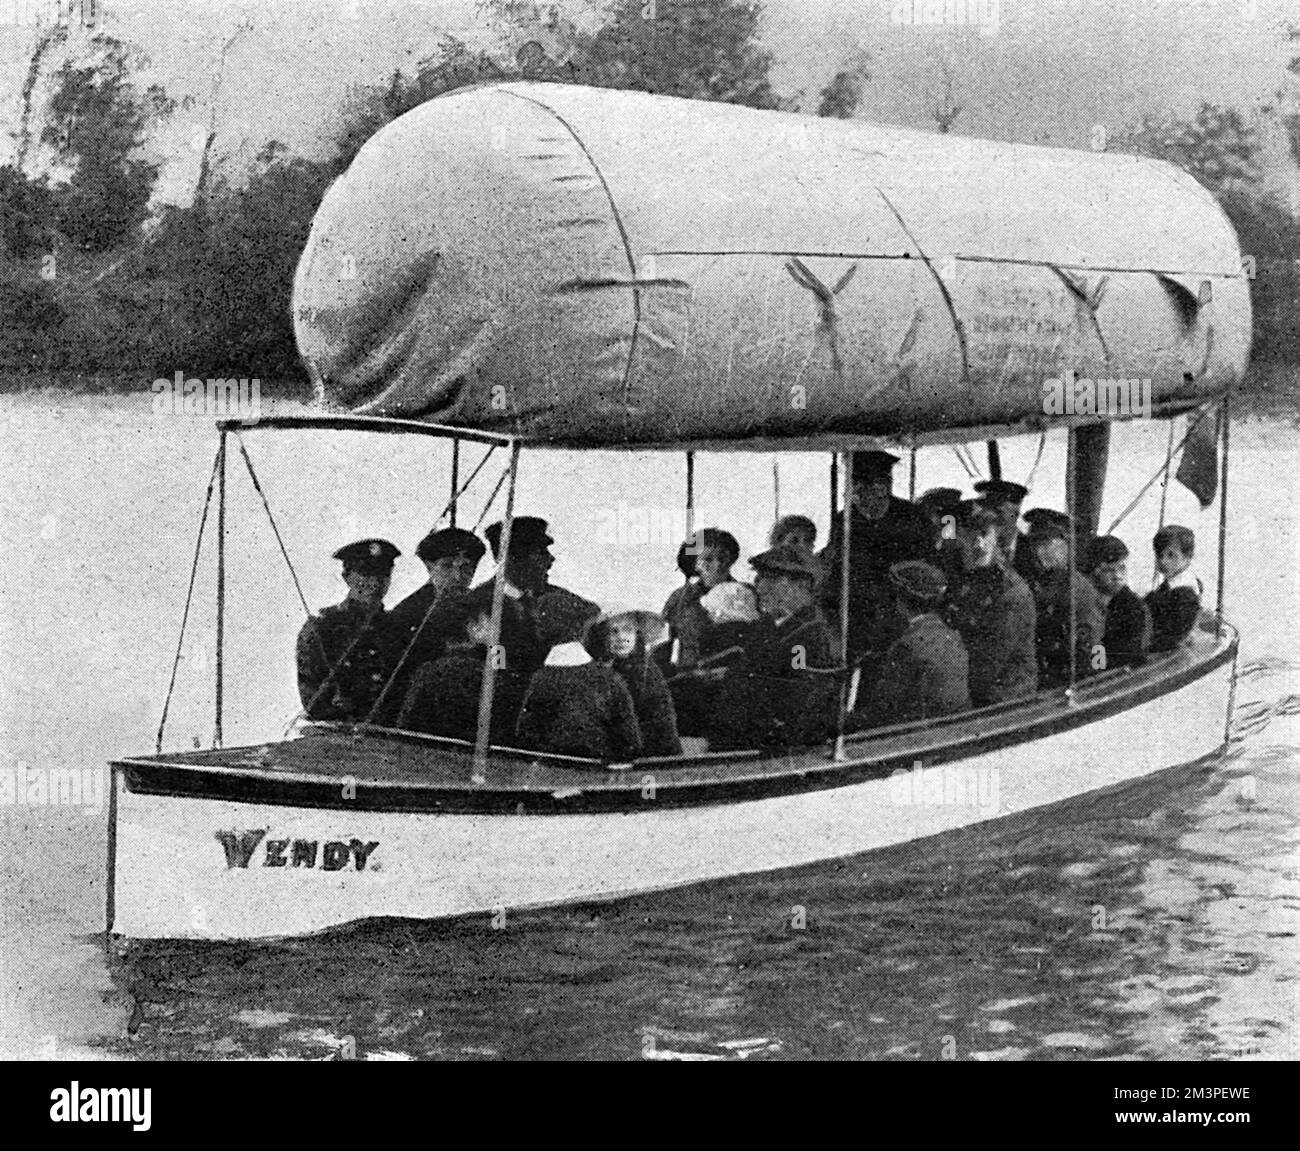 The scarcity of petrol during the First World War saw the introduction of cars and vans powered by gas, with the gas being transported in a huge bag on the roof.  In this instance, as the Illustrated Sporting and Dramatic News comments, 'the gas-bag is finding its way into more channels than one.'  This boat was photographed at an unidentified North of England pleasure resort.  1917 Stock Photo